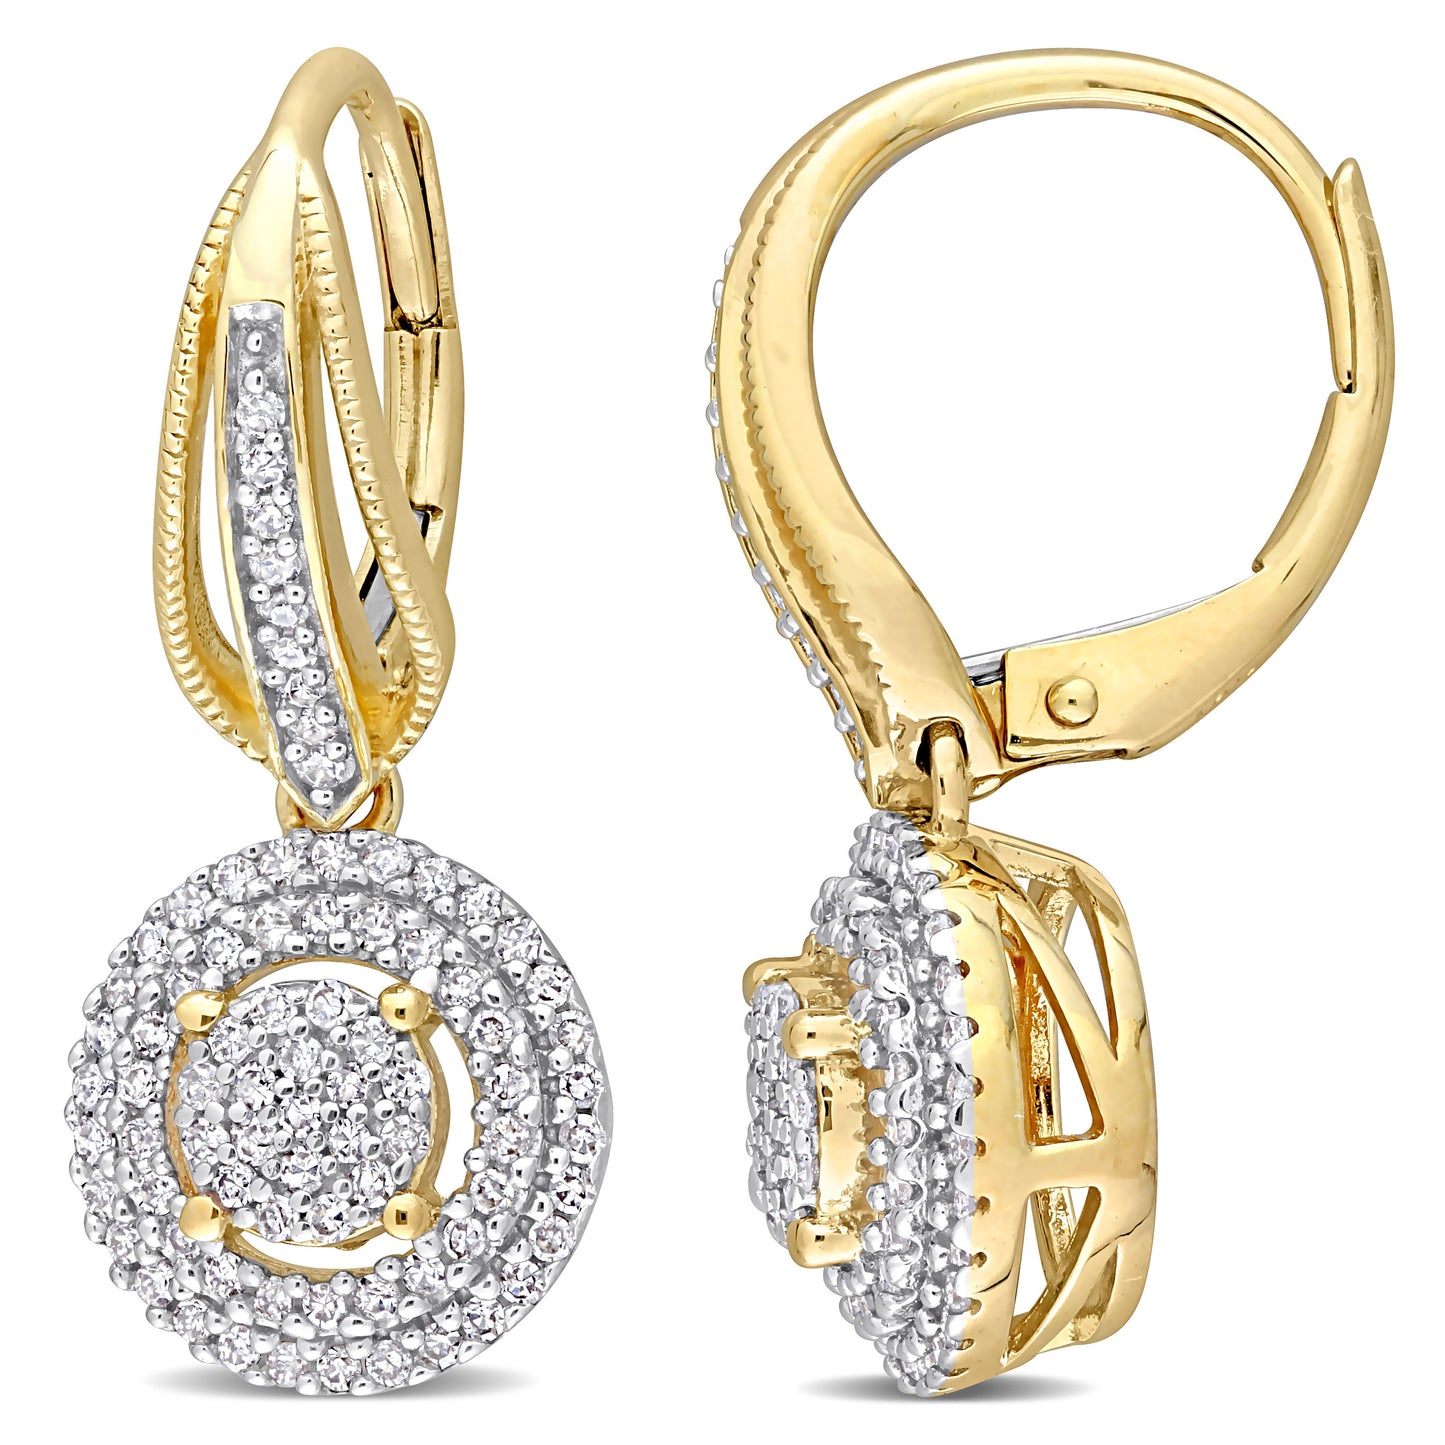 Double Halo Round Cluster Diamond Earrings in 10k Yellow Gold